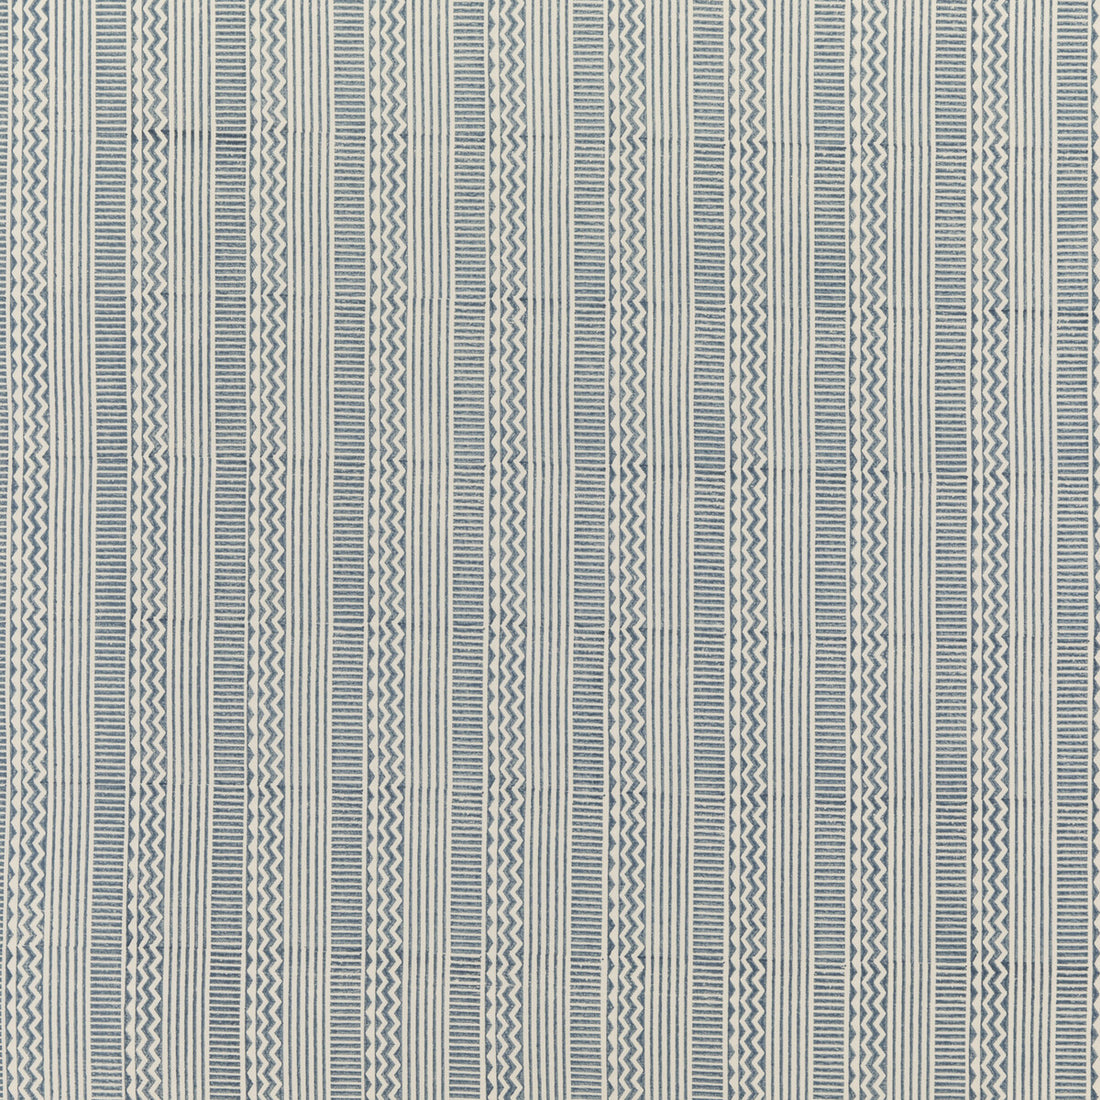 Tolosa fabric in indigo color - pattern PP50450.1.0 - by Baker Lifestyle in the Homes &amp; Gardens III collection